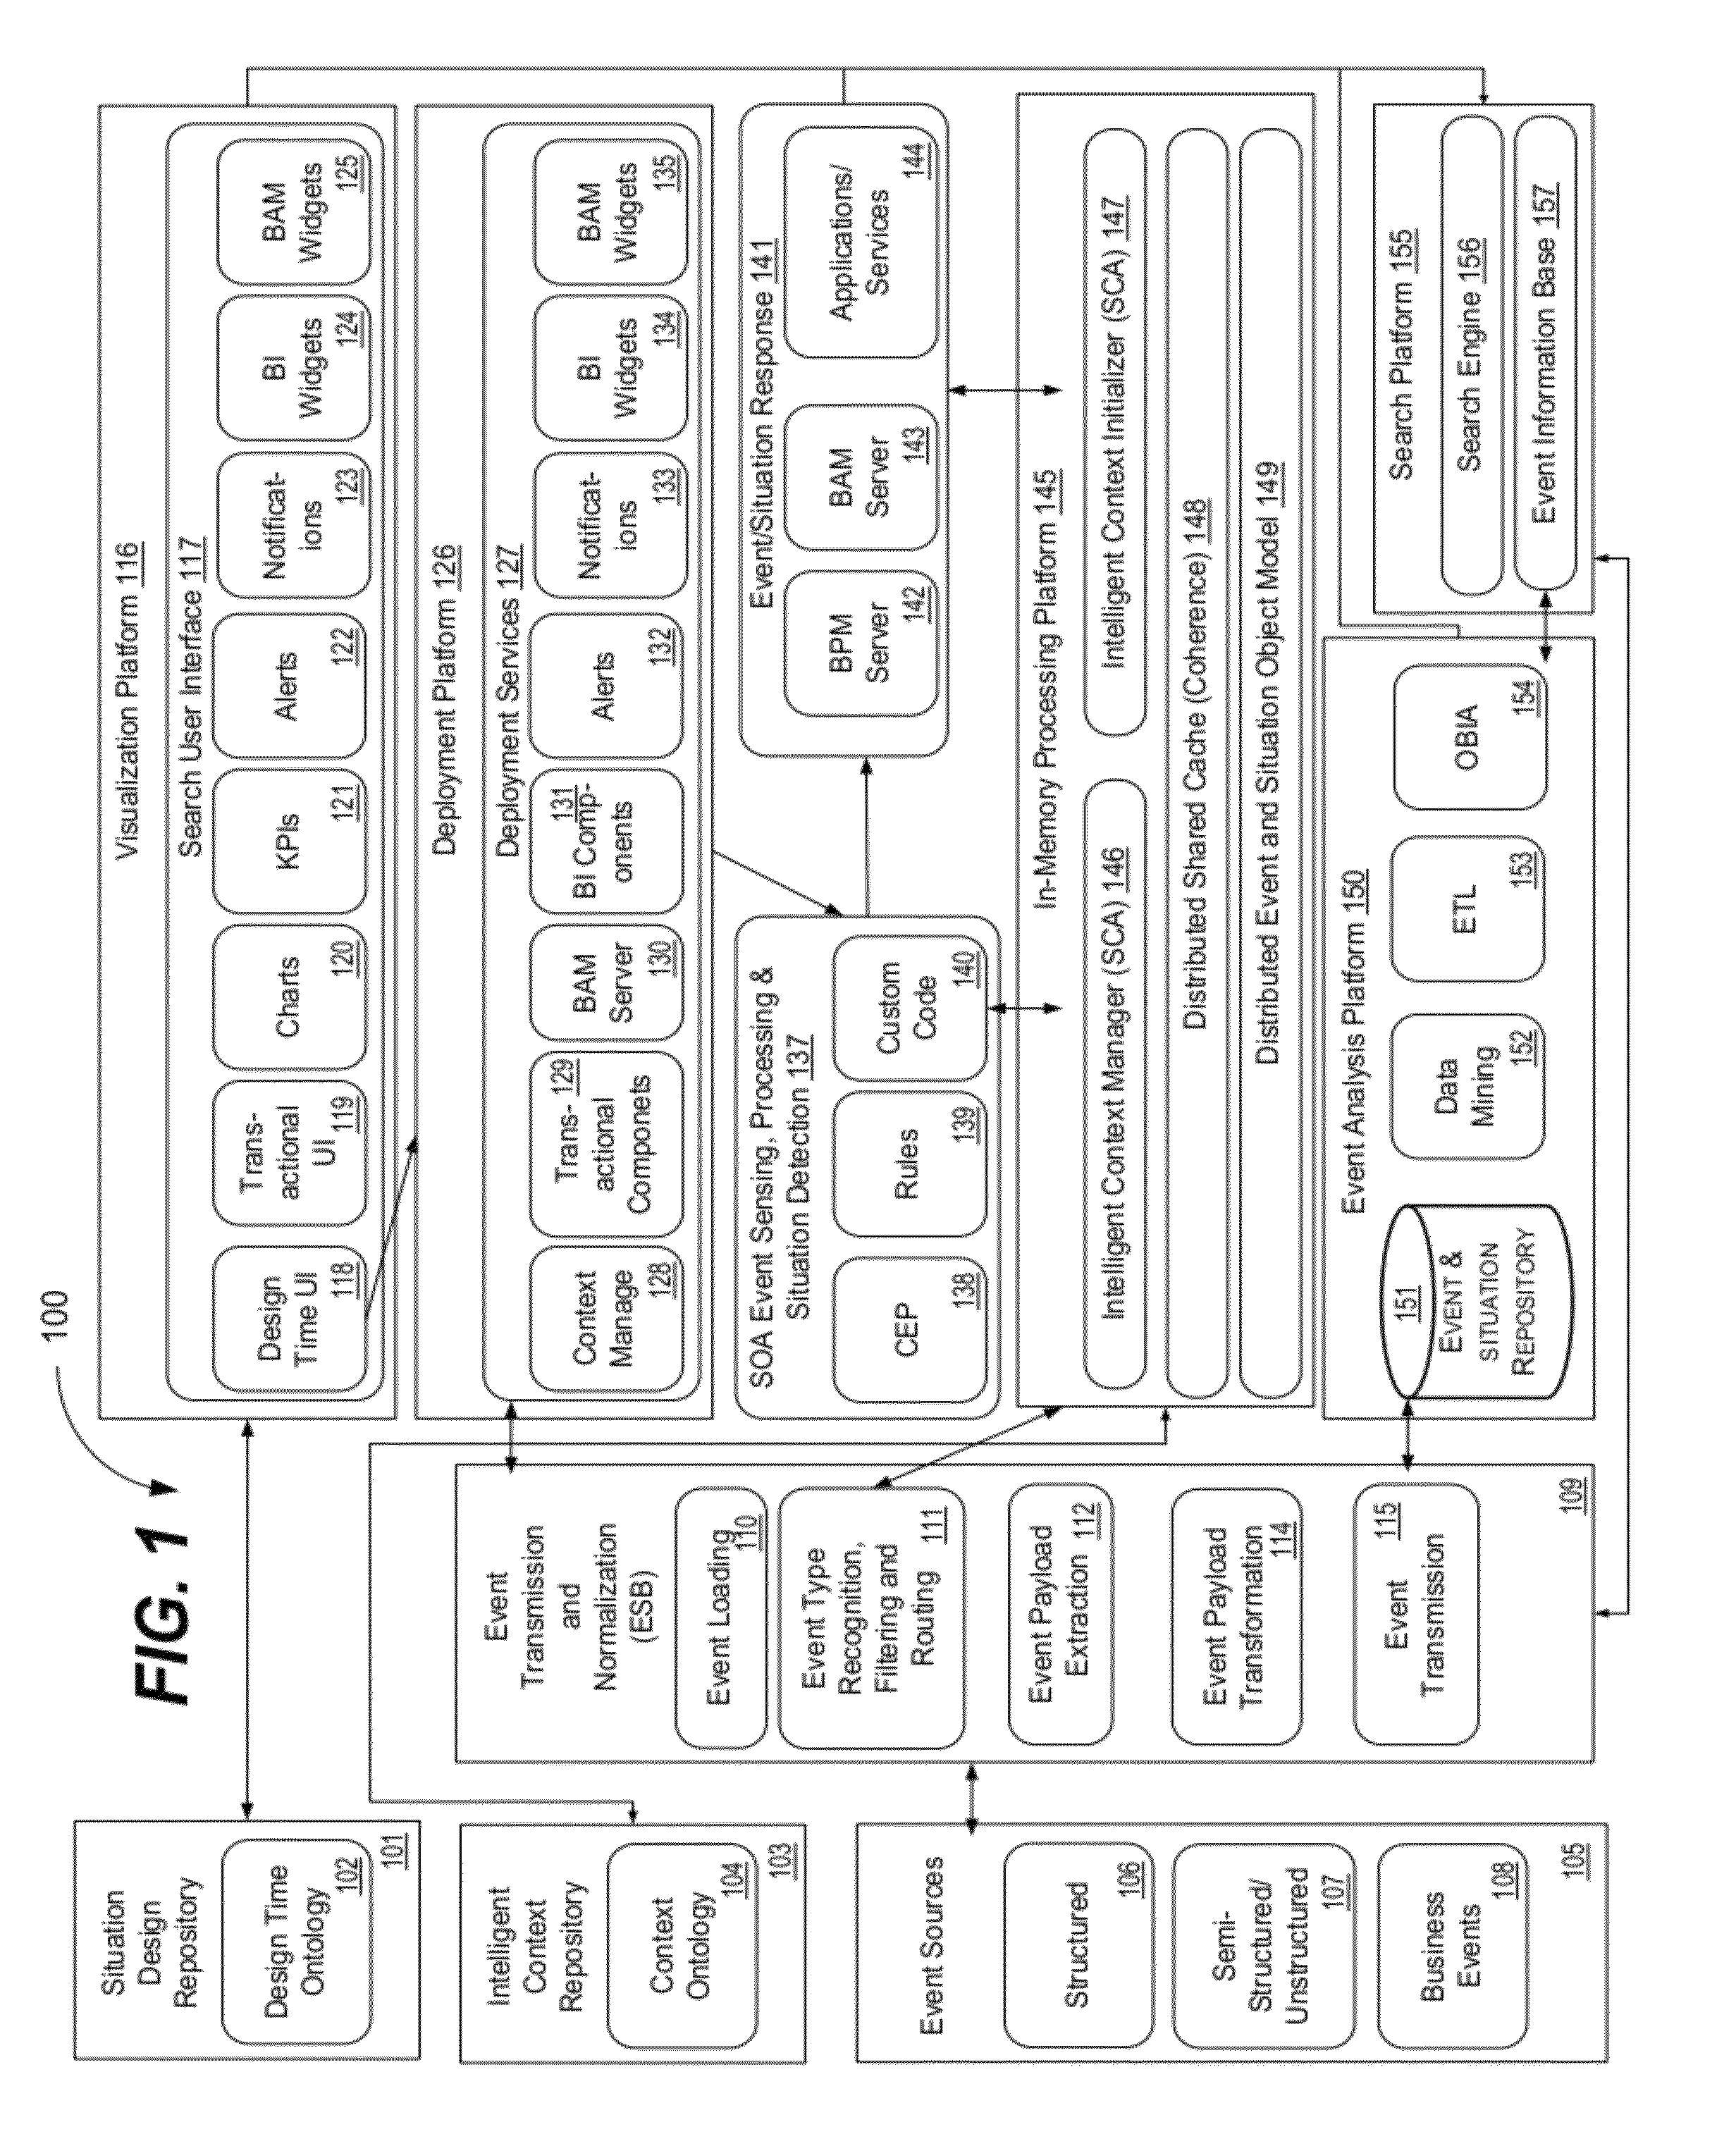 Method and system for providing decision making based on sense and respond